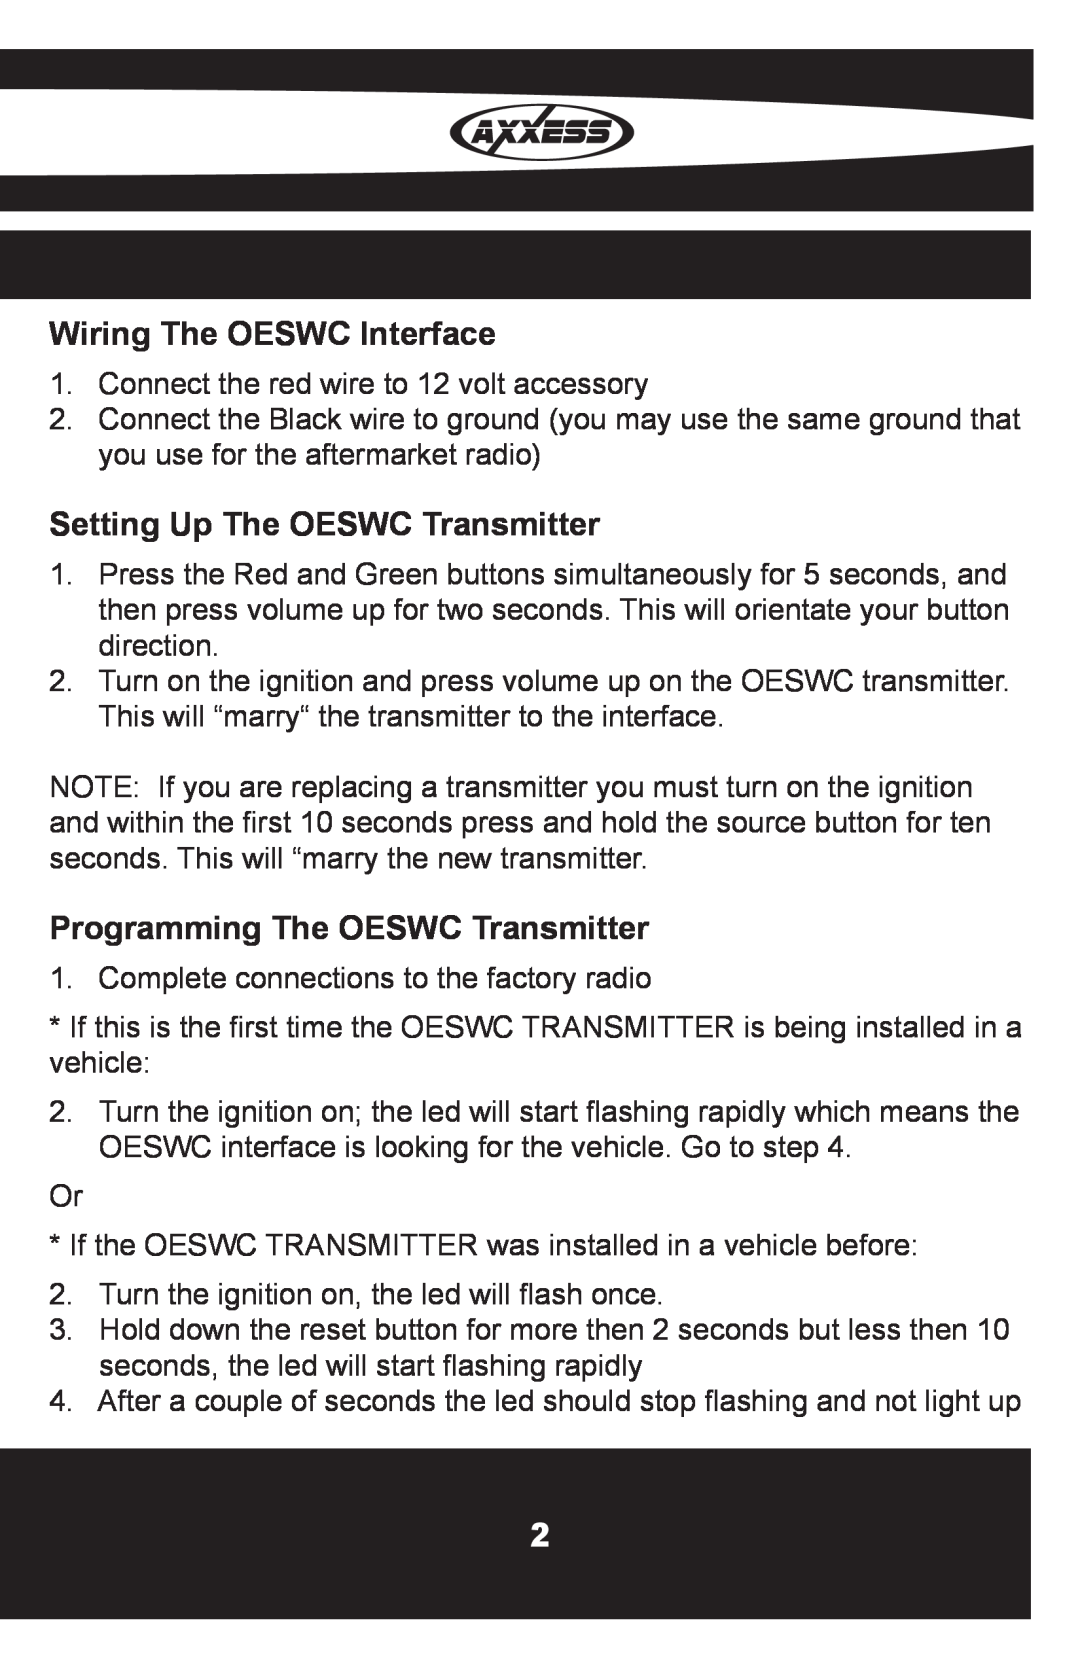 Axxess Interface OESWC-7552-RF installation instructions Wiring The OESWC Interface, Setting Up The OESWC Transmitter 